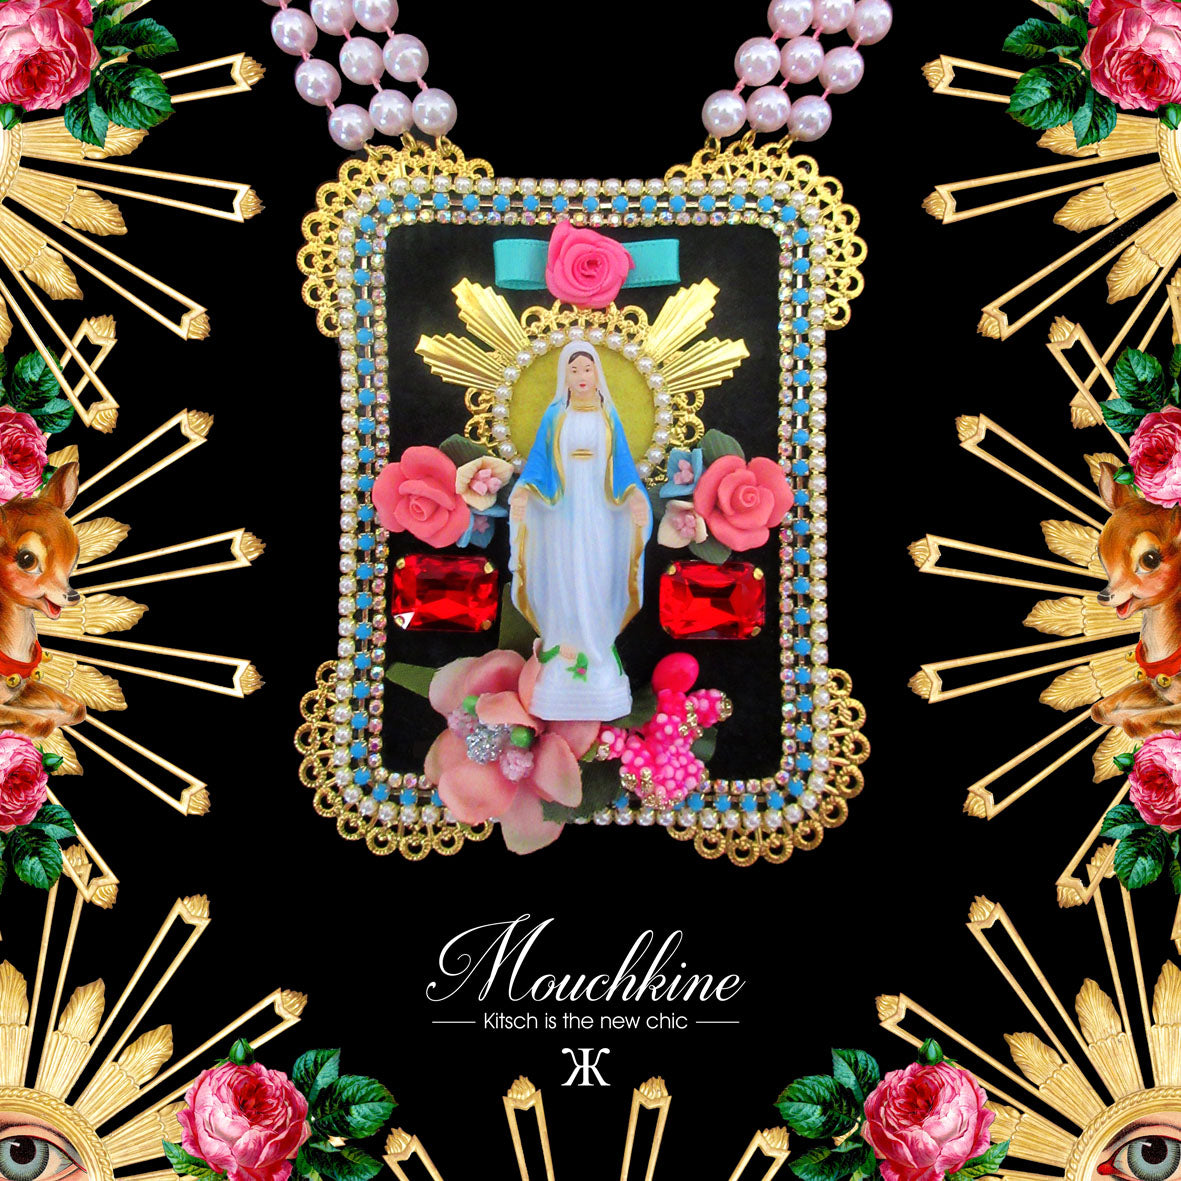 mouchkine jewelry handmade couture kitsch and trendy madonna necklace.